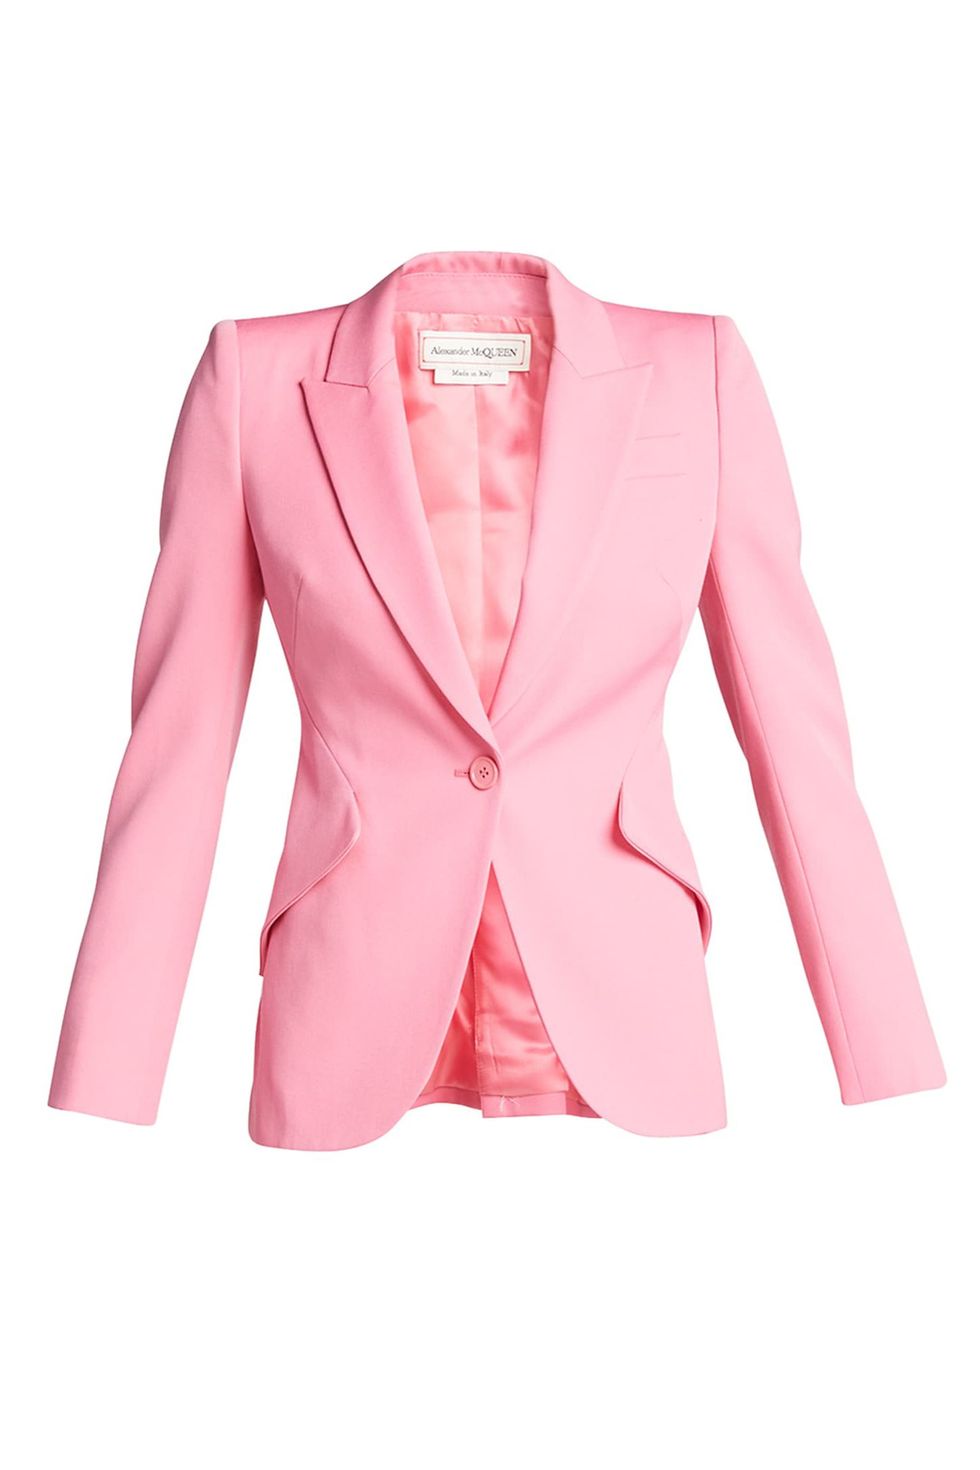 Kate Middleton Wears Pink Alexander McQueen Blazer at Early Years ...